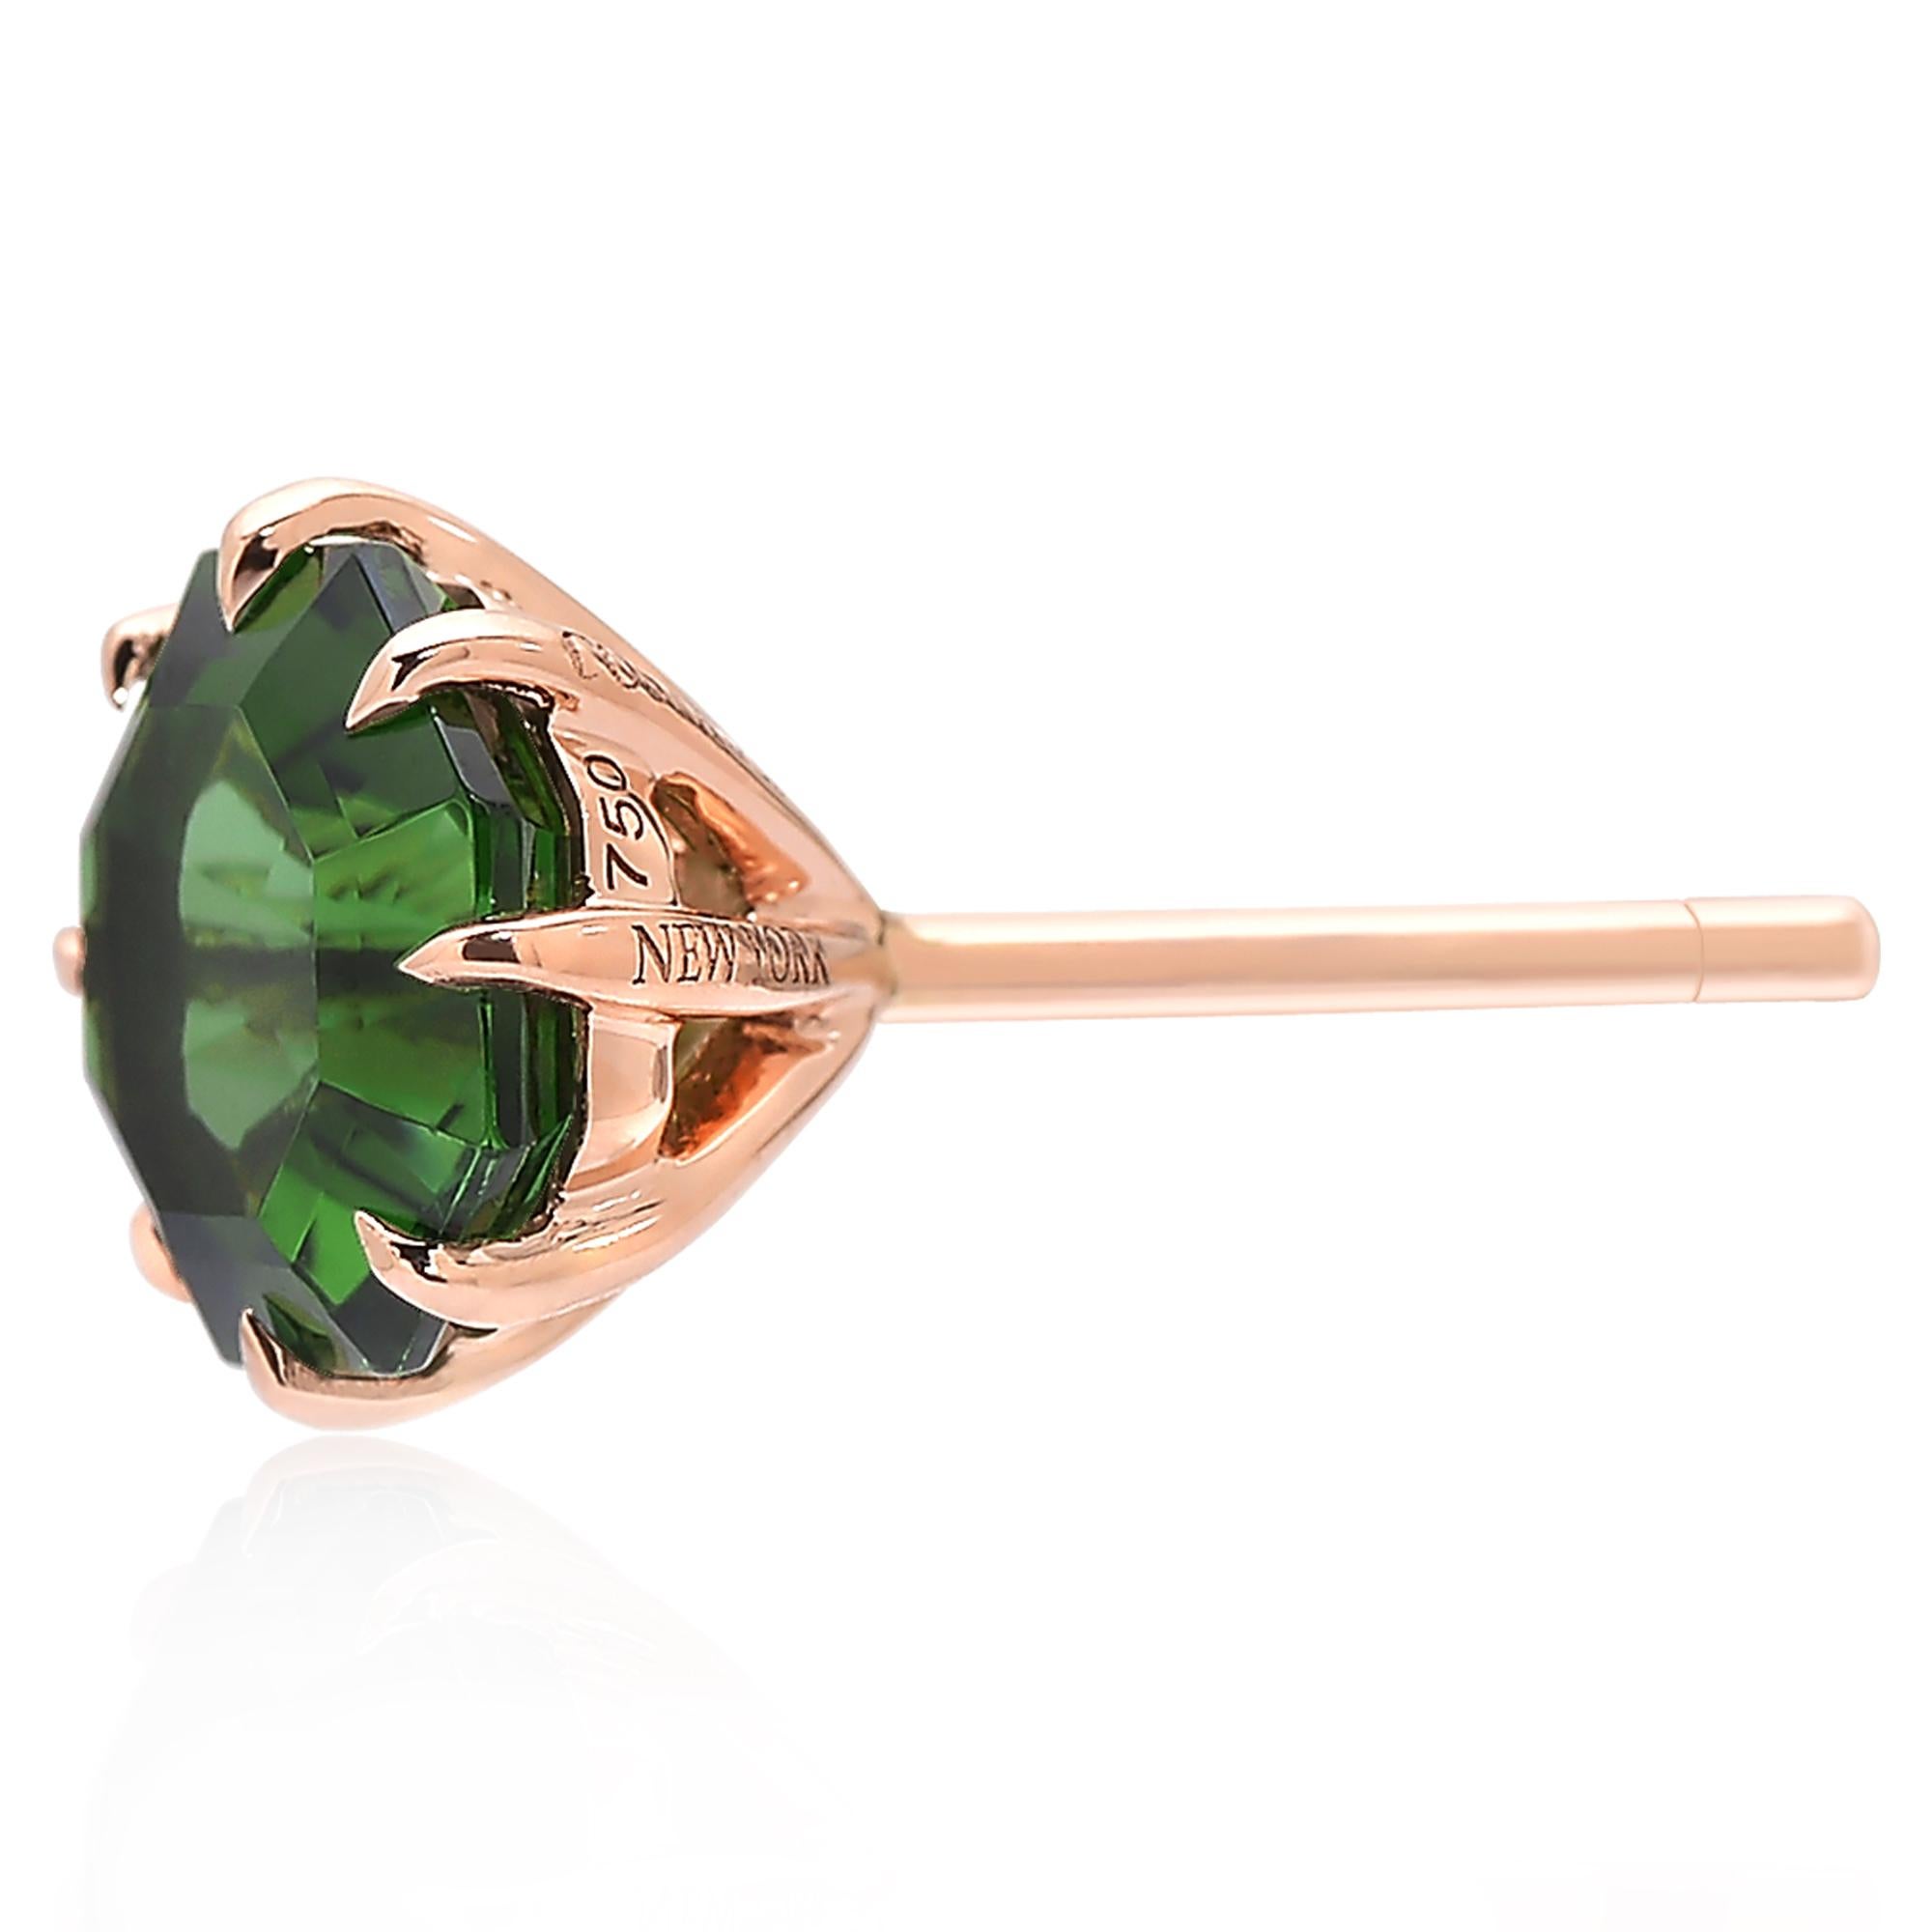 Paolo Costagli 18 Karat Rose Gold 2.87 Carat Green Tourmaline Stud Earrings In New Condition For Sale In Miami beach, FL